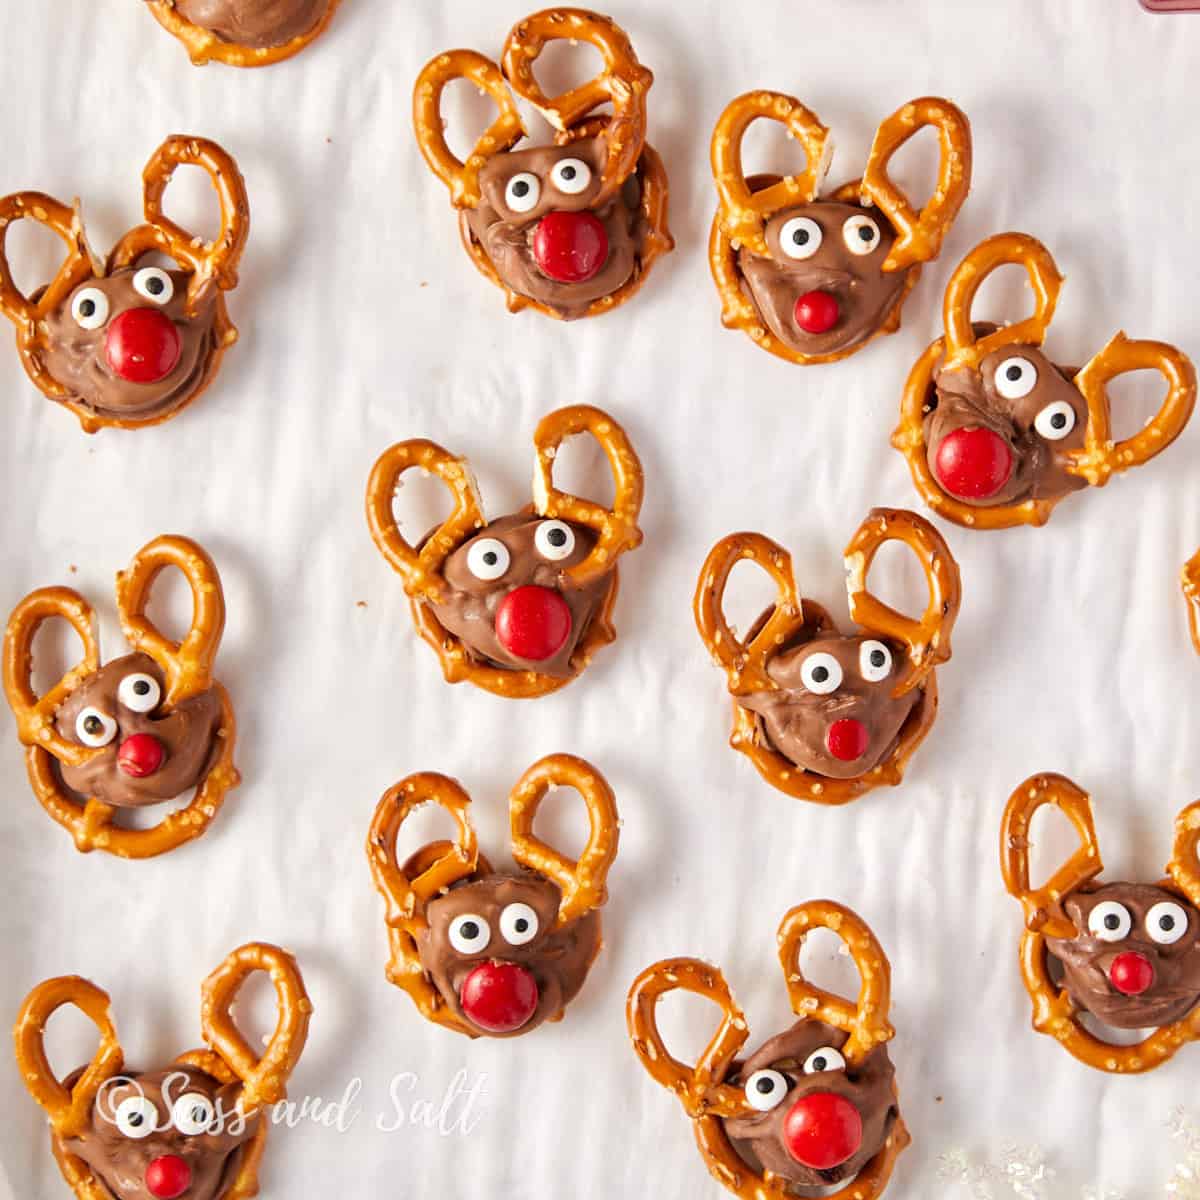 Overhead view of homemade pretzel reindeer with Rolo treats with antlers, eyes, and red noses.